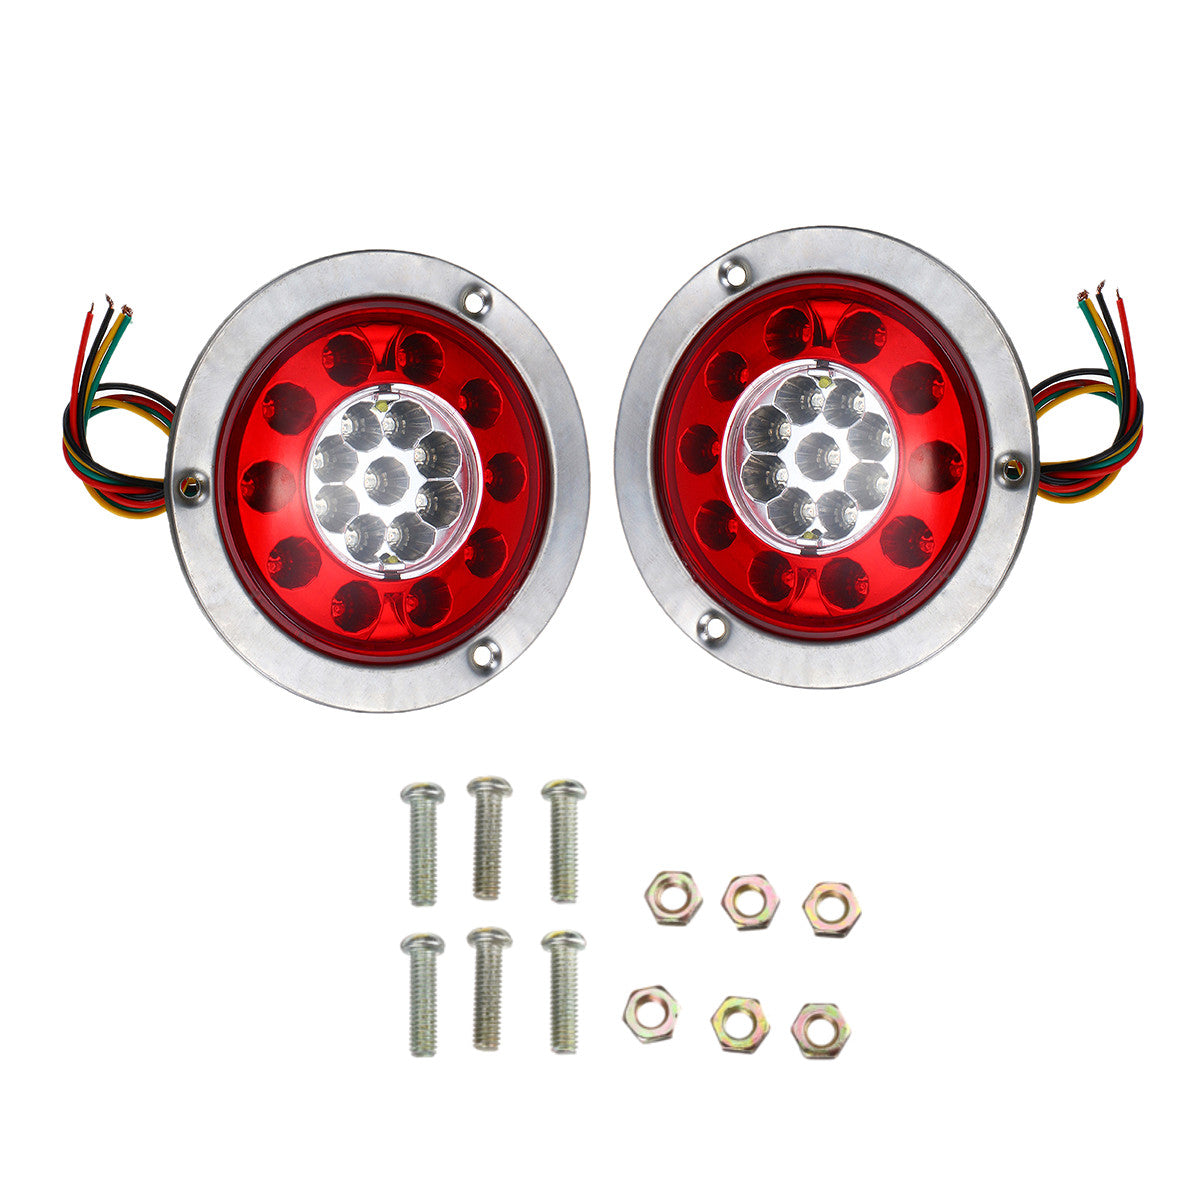 Firebrick 19 LED Truck Lorry Brake Lights Stop Turn Tail Lamp Stainless Steel Turn Signal Stop Lights